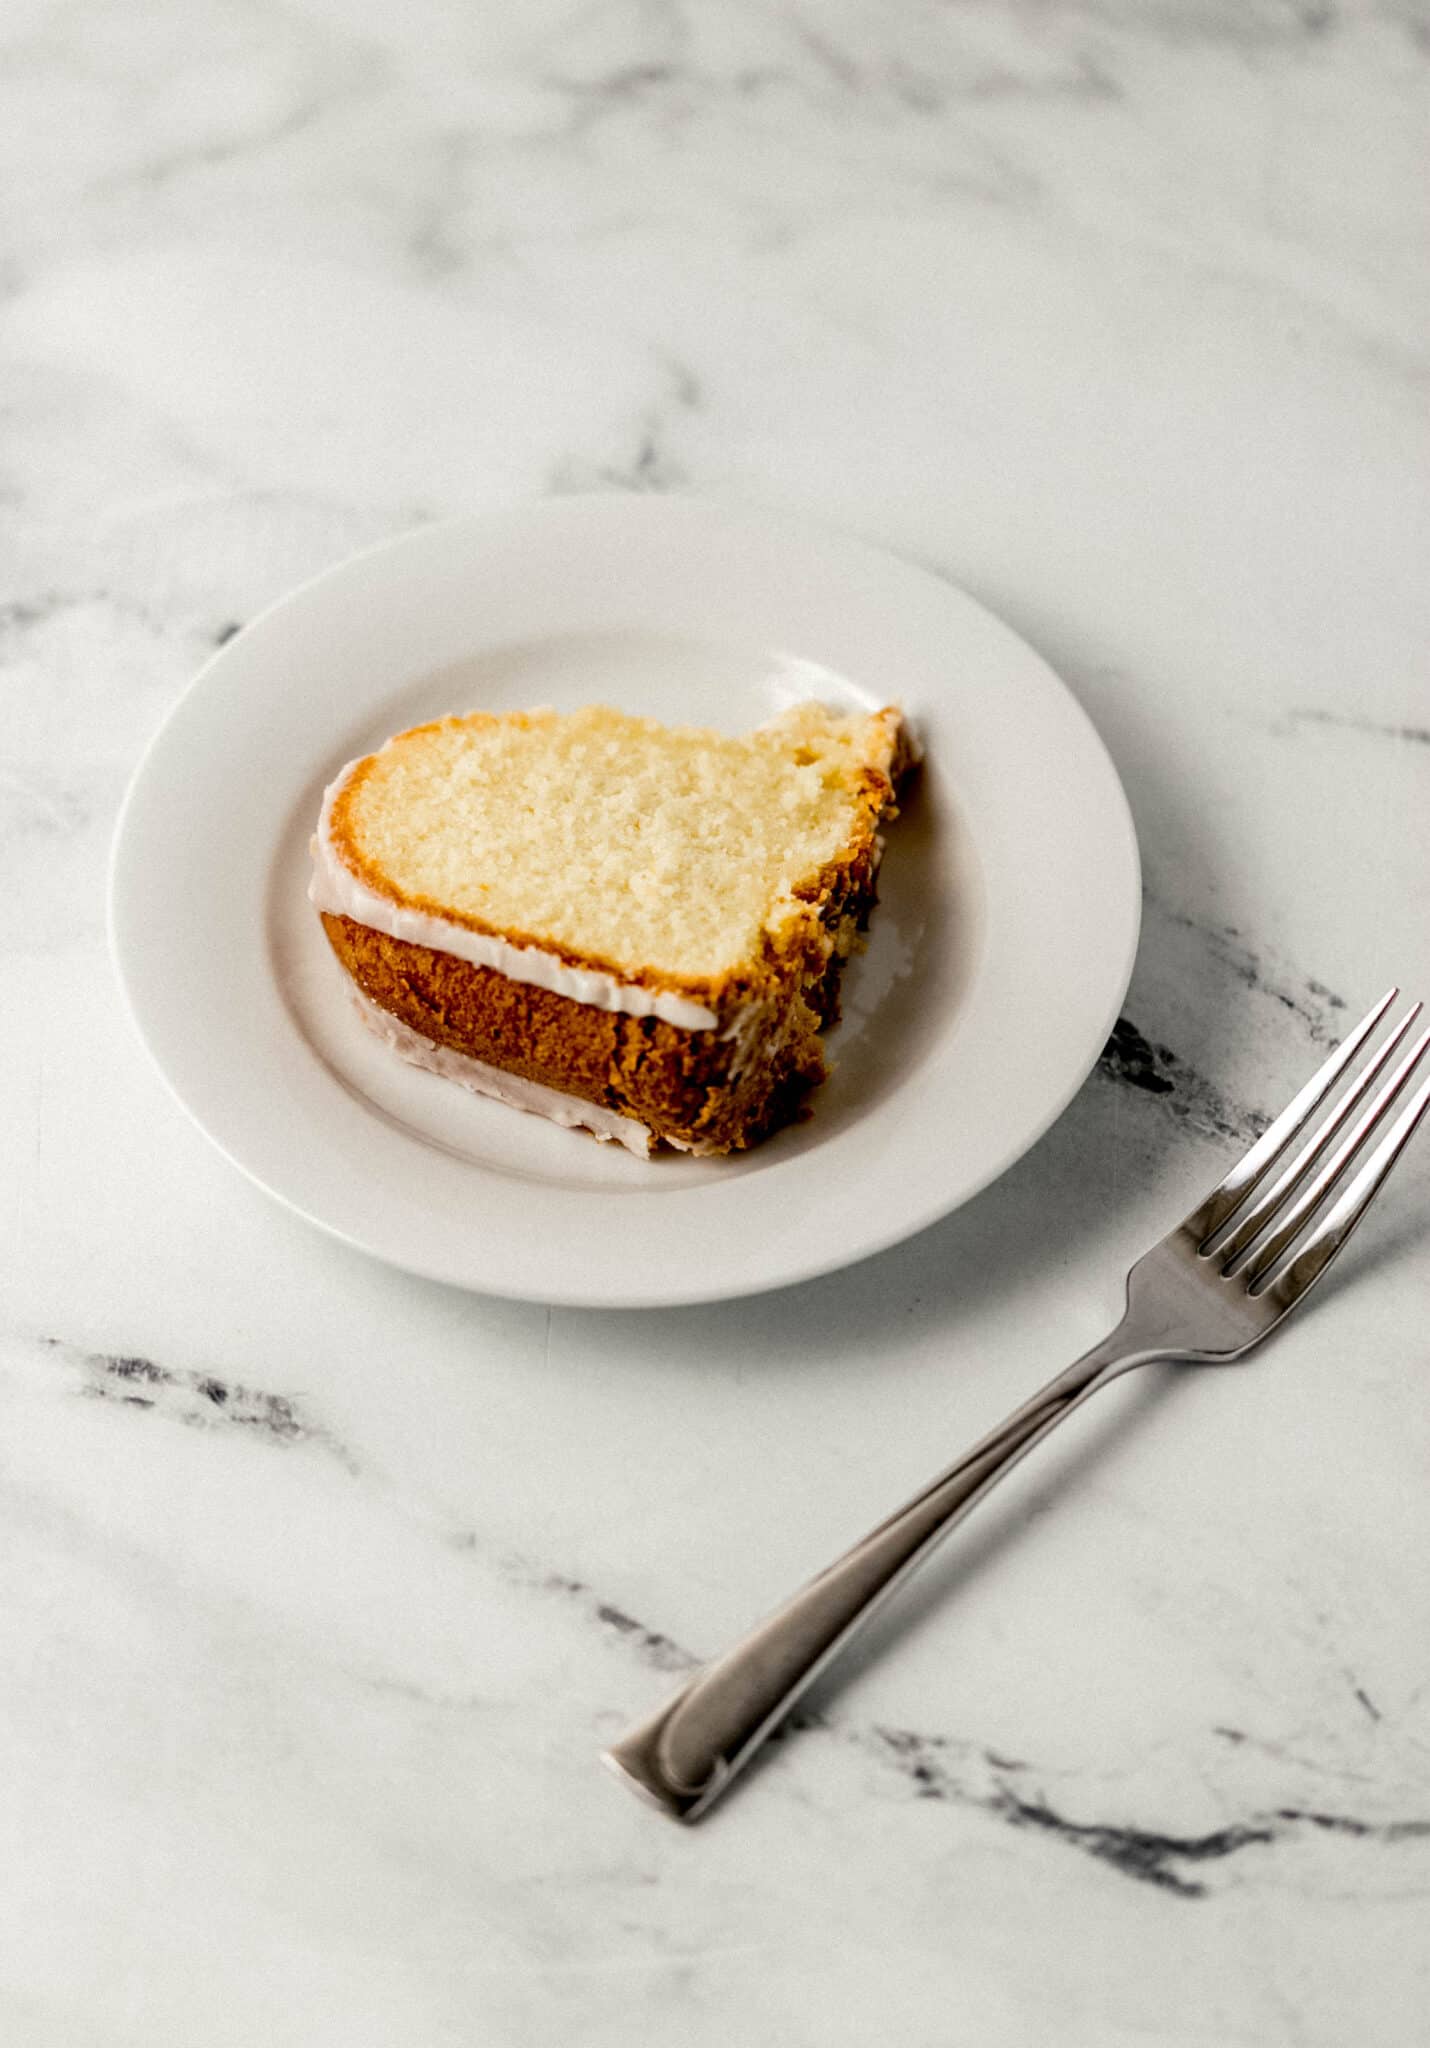 slice of finished cake on white plate by a fork